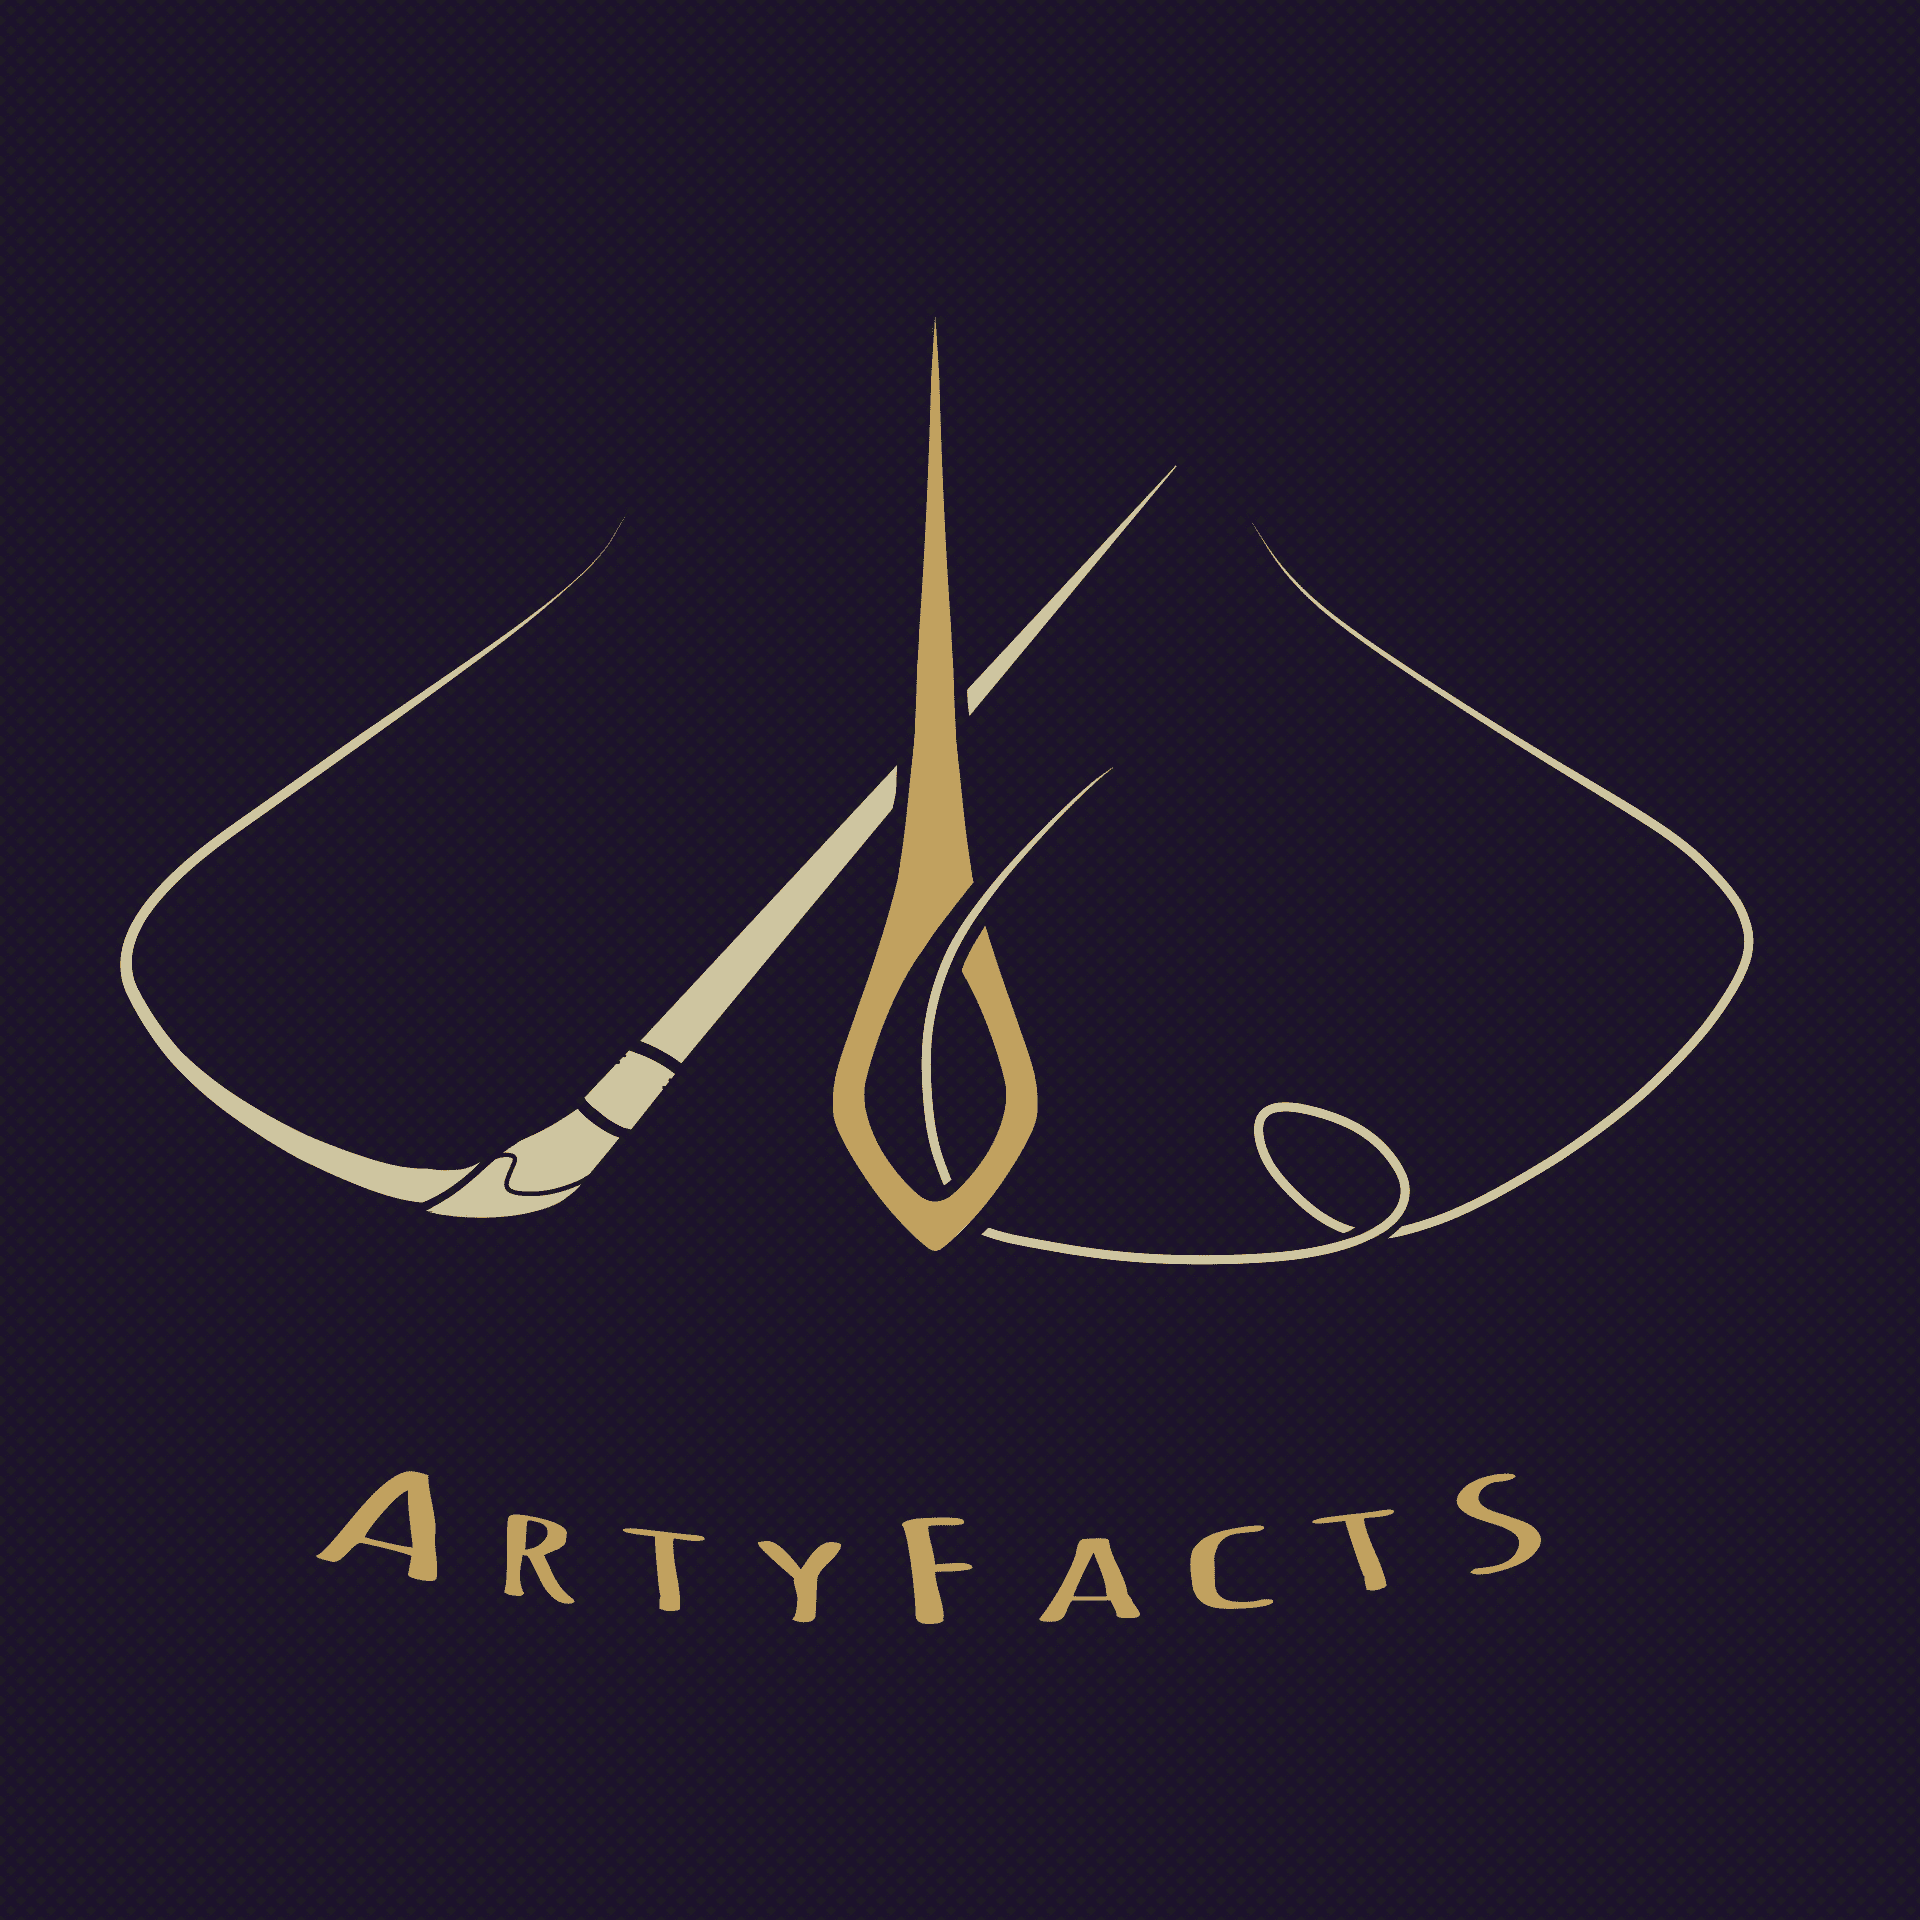 ArtyFacts